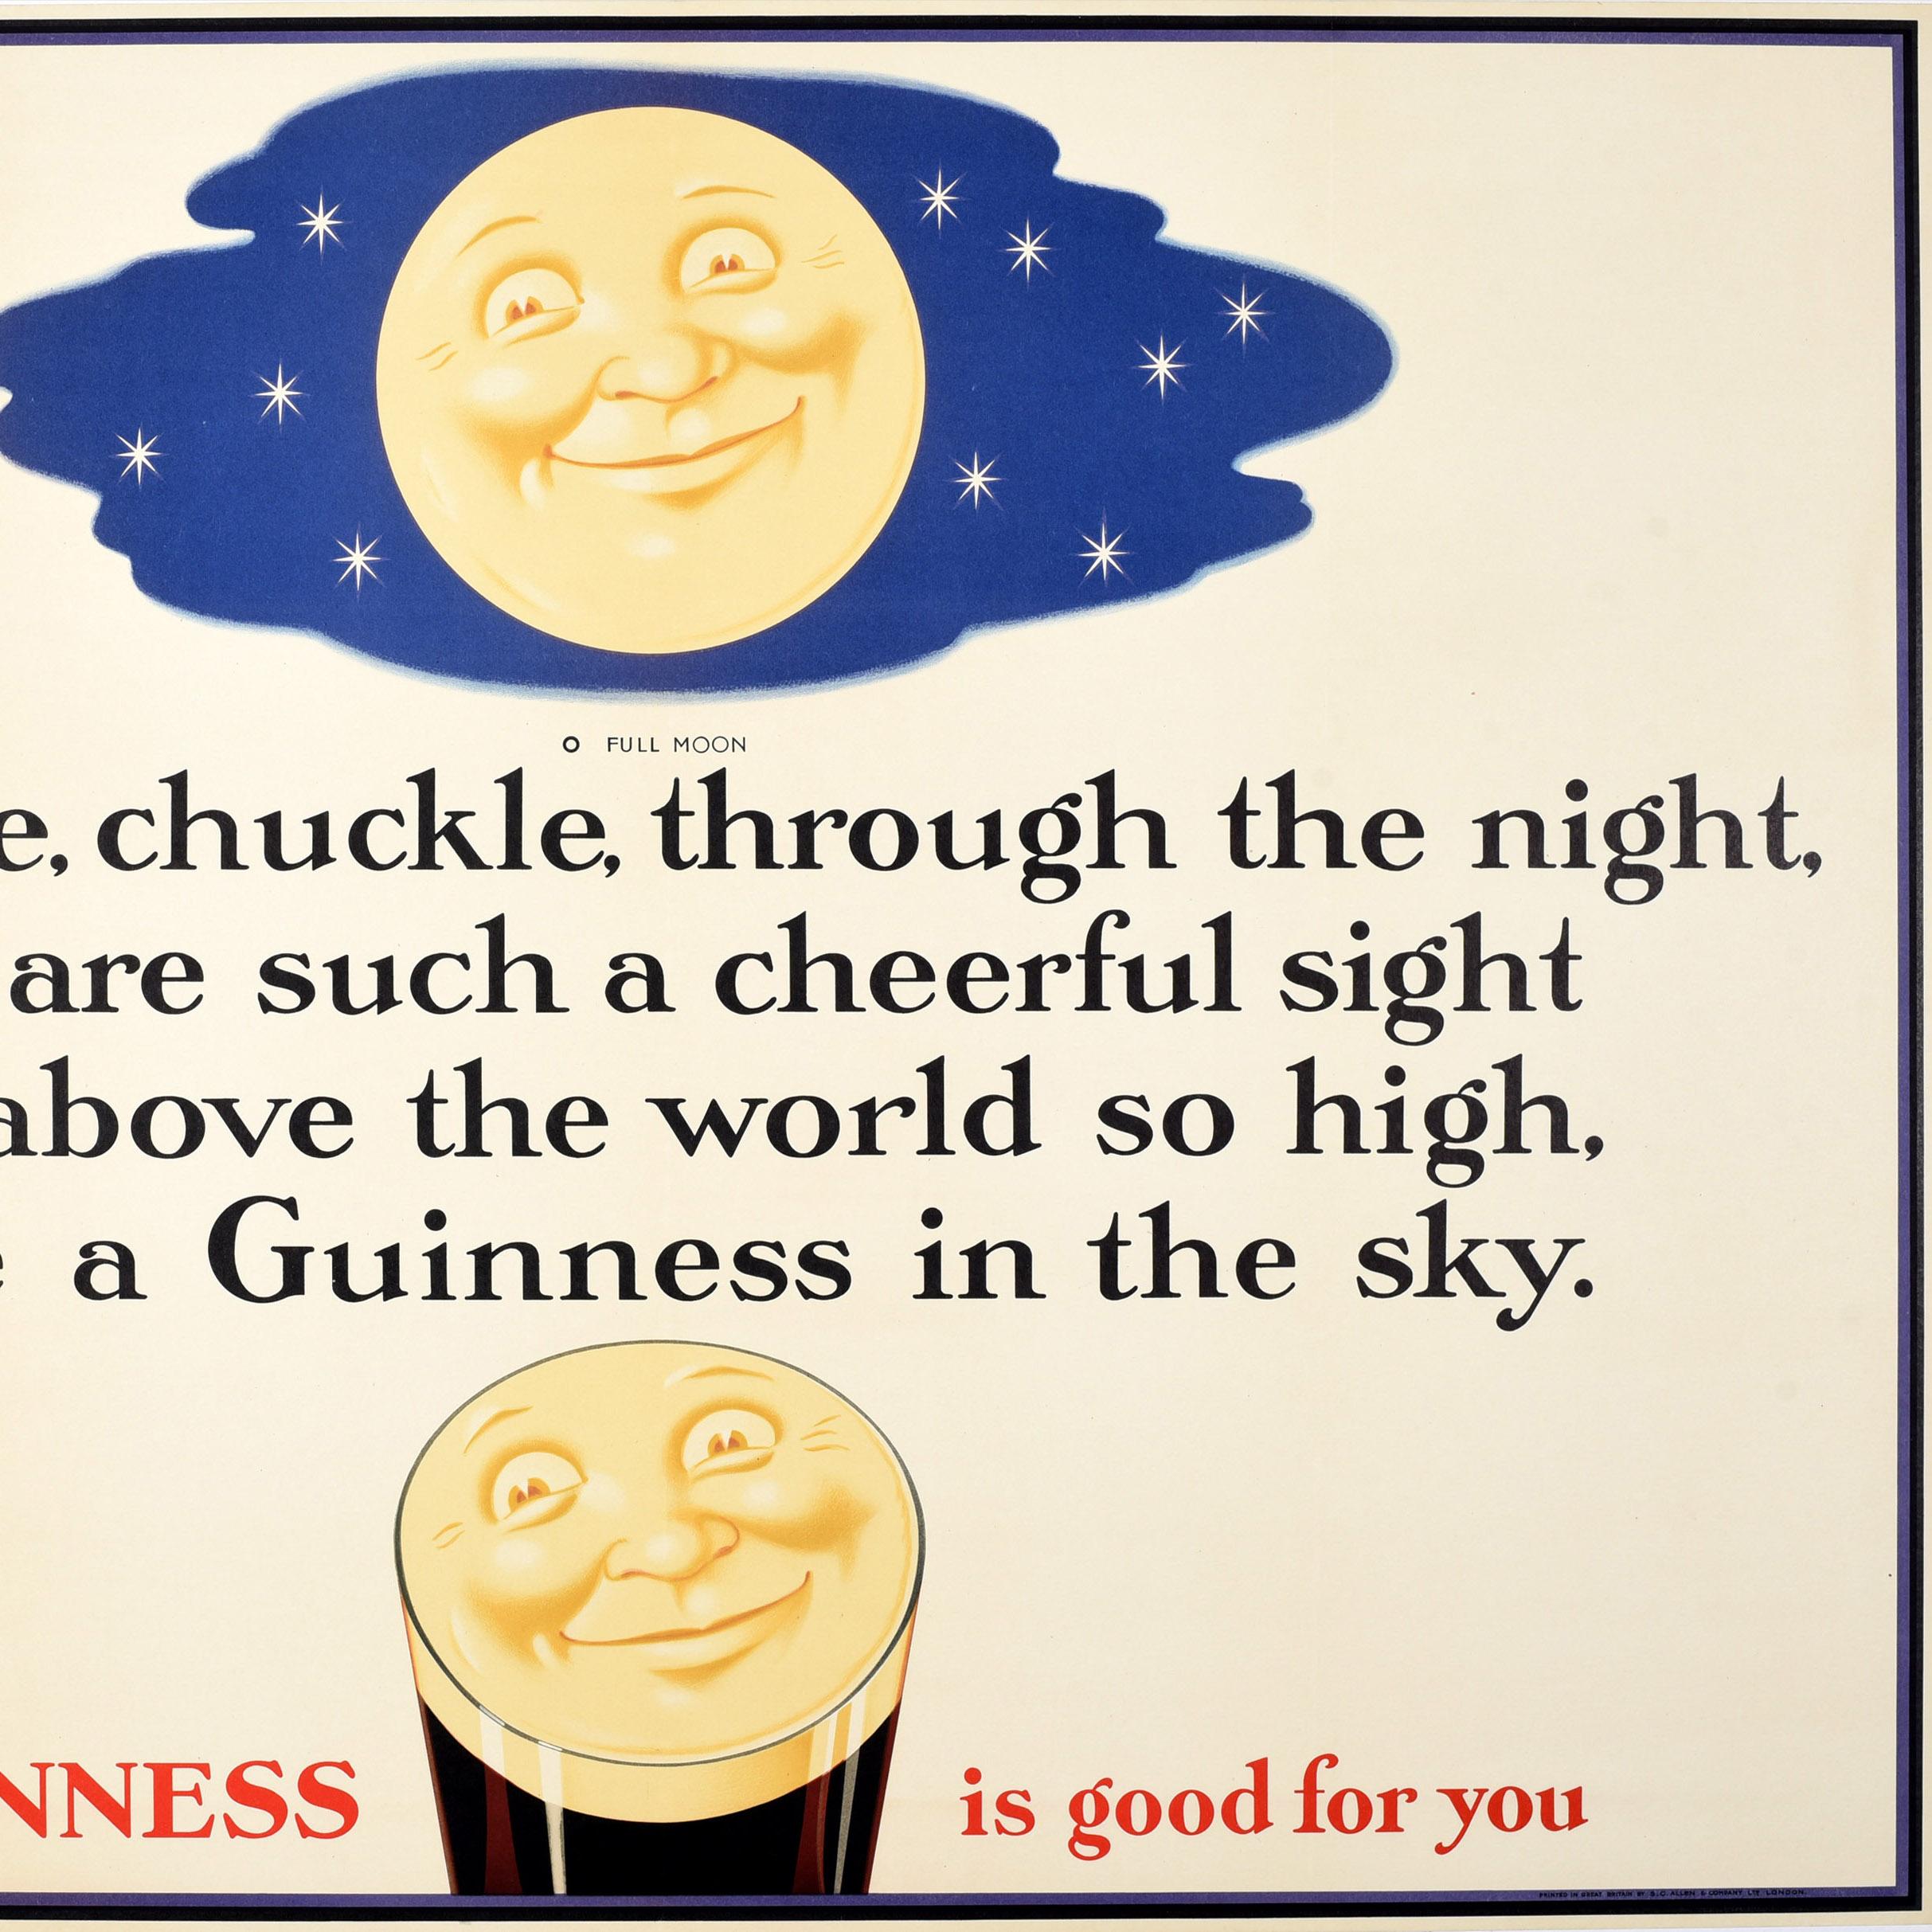 guinness ads through the years